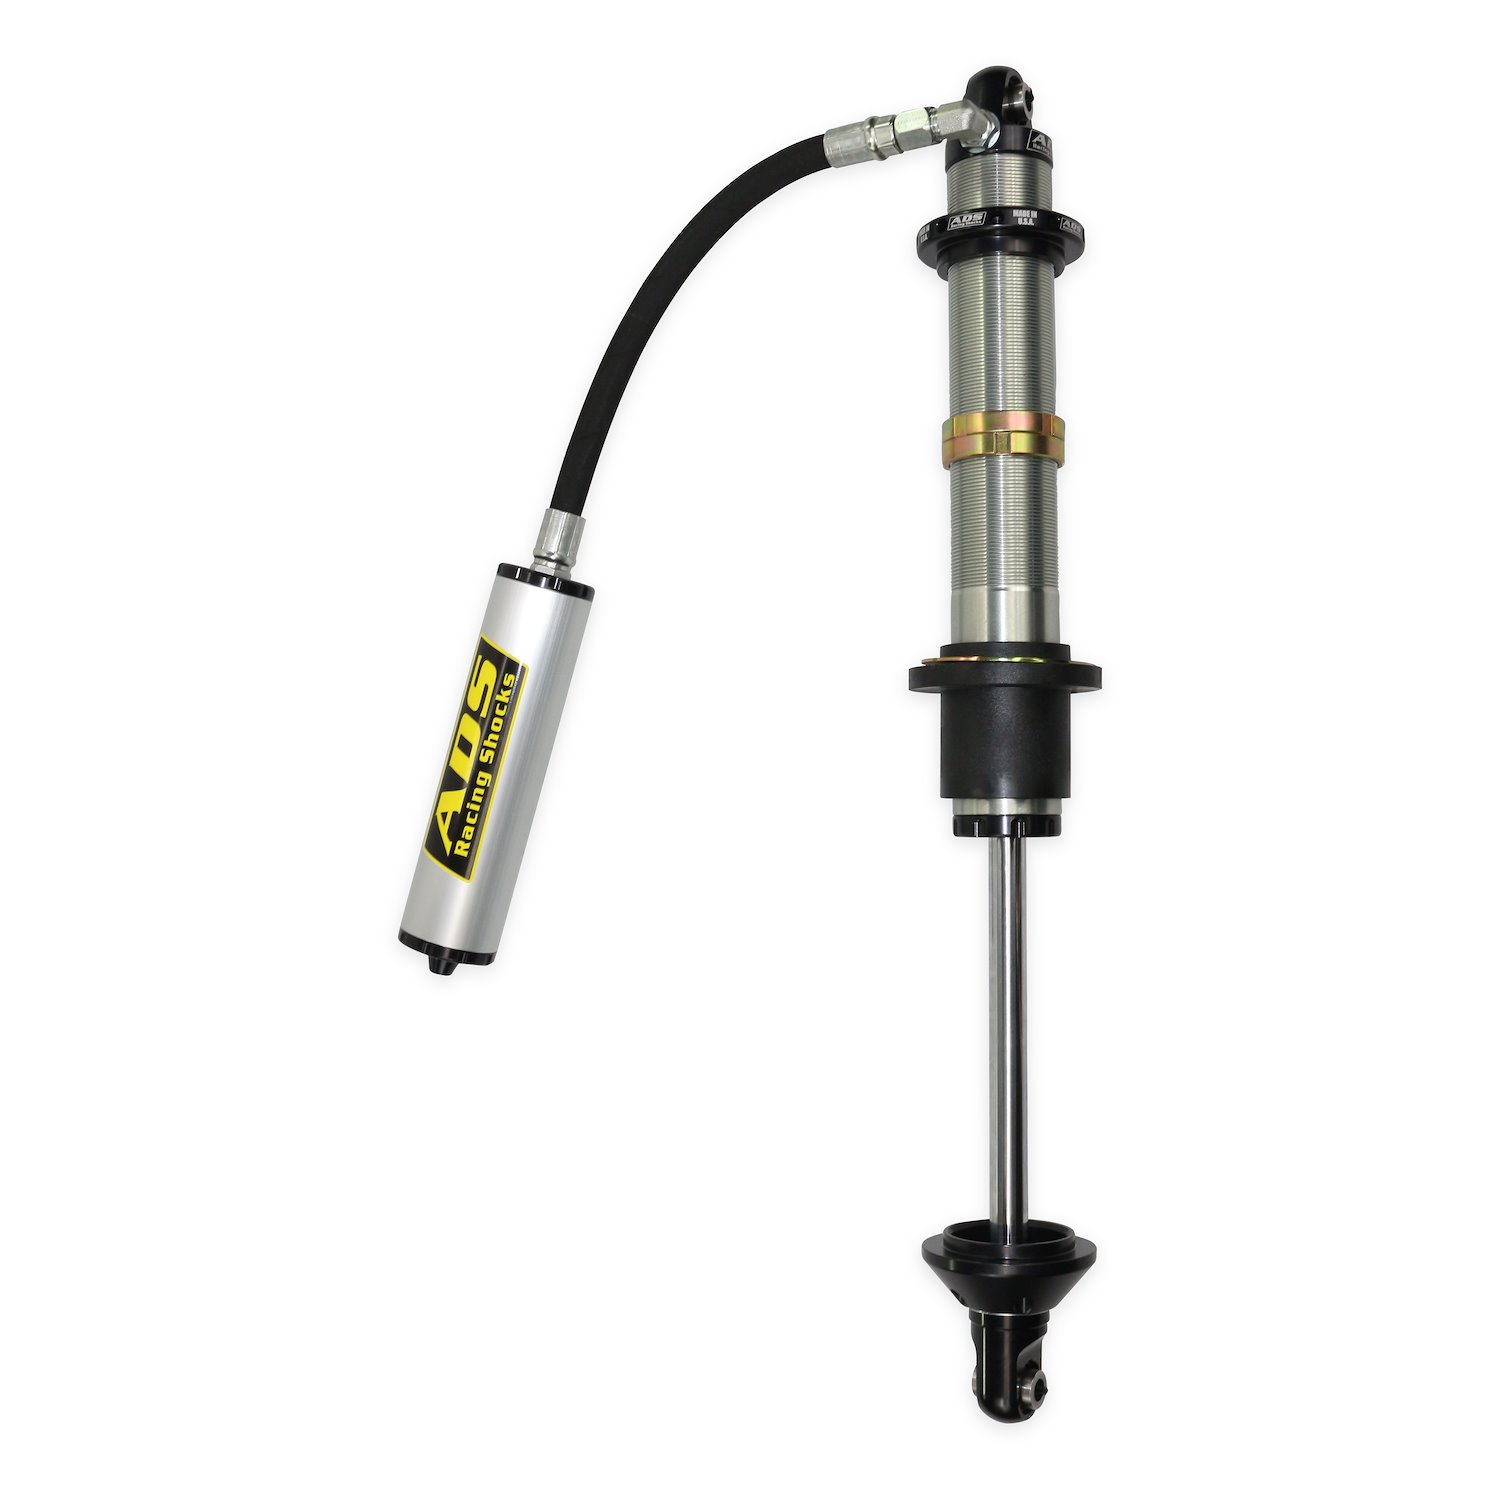 250-COR16-A90 Coil-Over Race Shock, 2.5 in. x 16 in. Stroke, w/ Remote Reservoir (90-Degree Hose), w/ Compression Adjustment